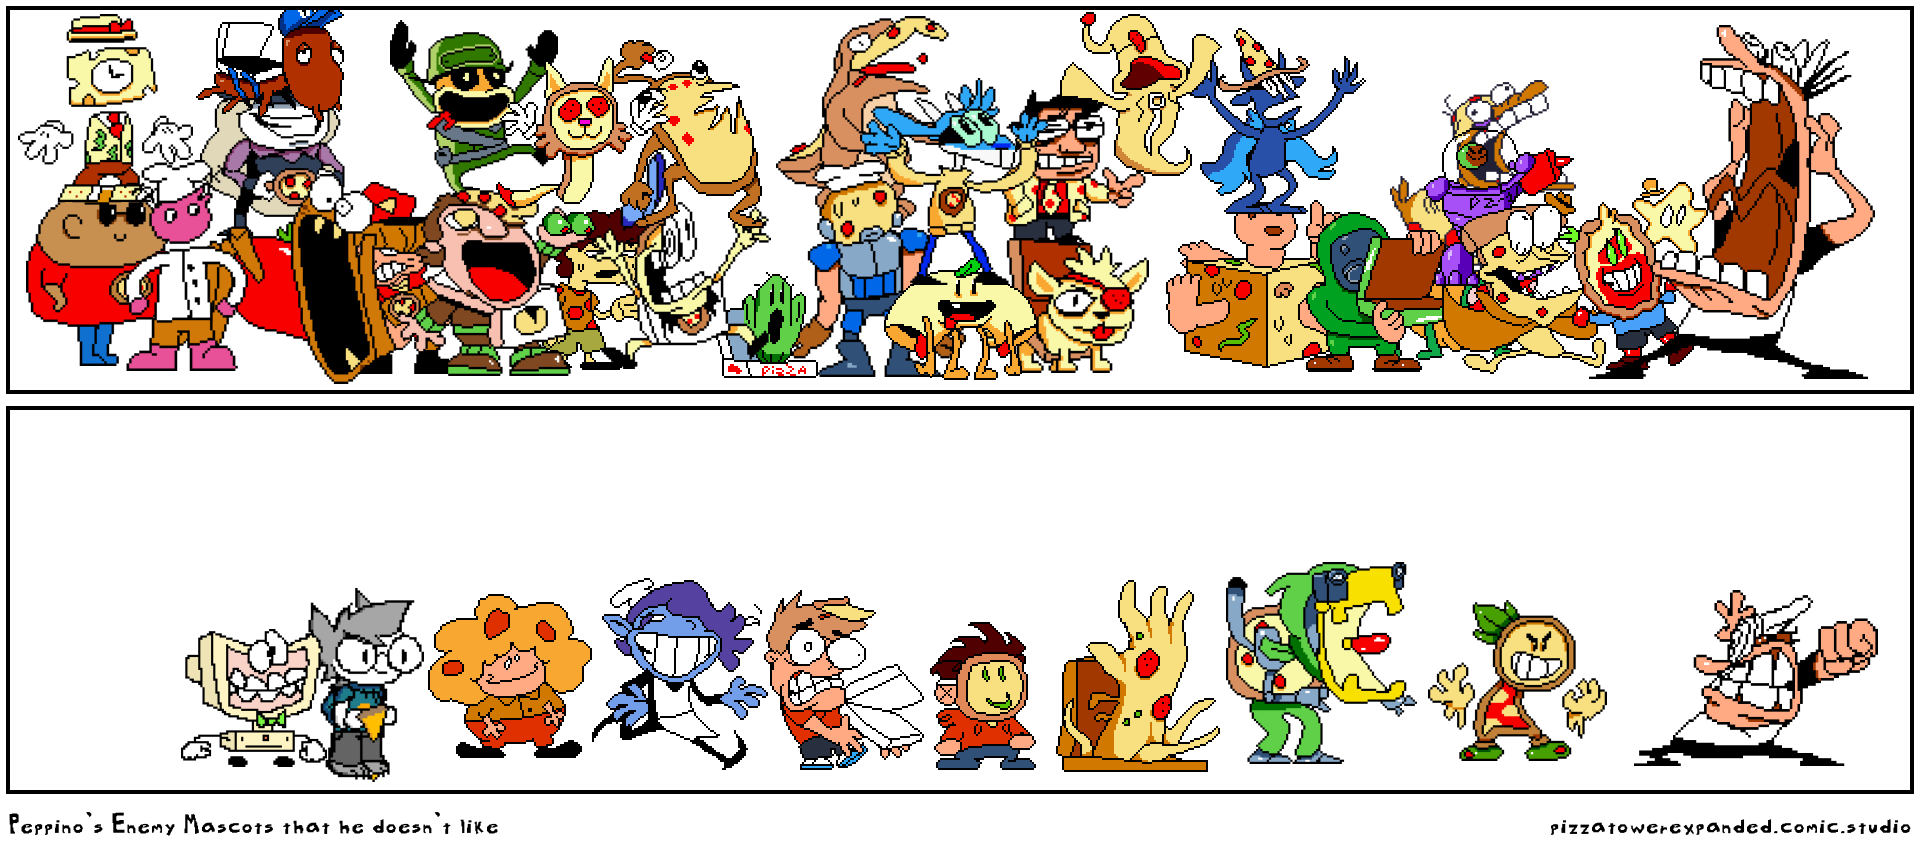 Peppino's Enemy Mascots that he doesn't like